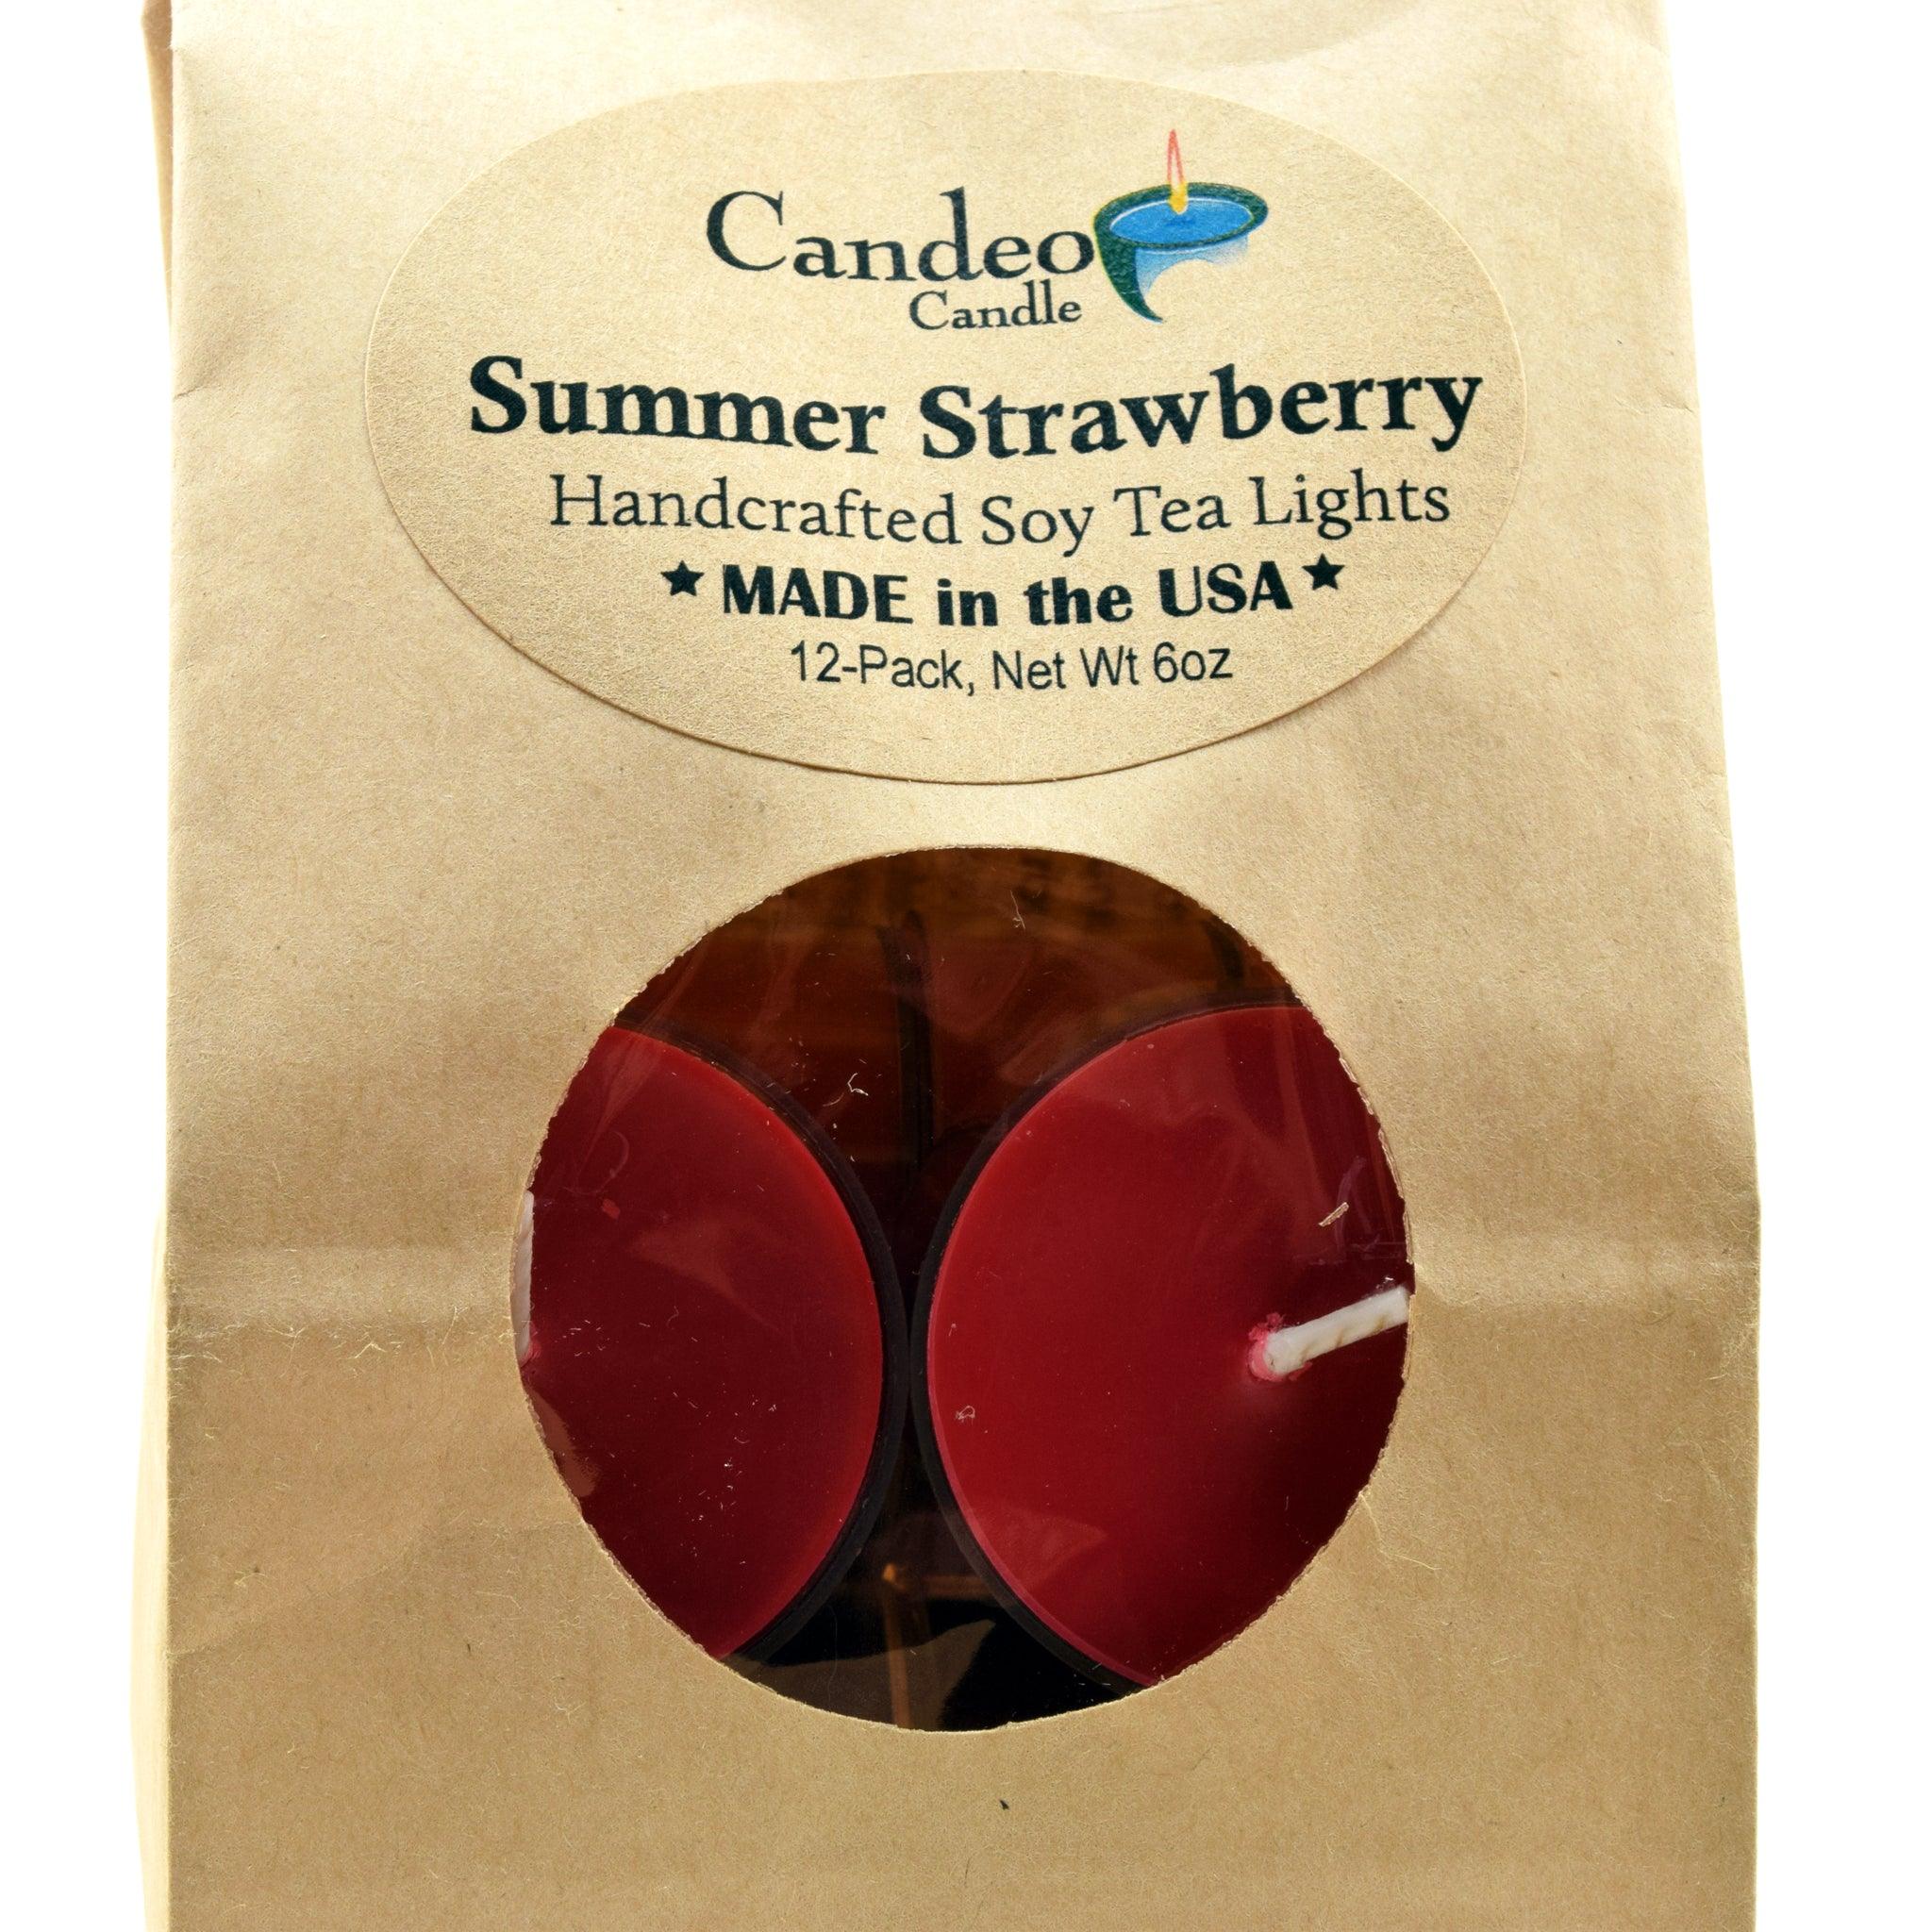 Summer Strawberry, Soy Tea Light 12-Pack - Candeo Candle